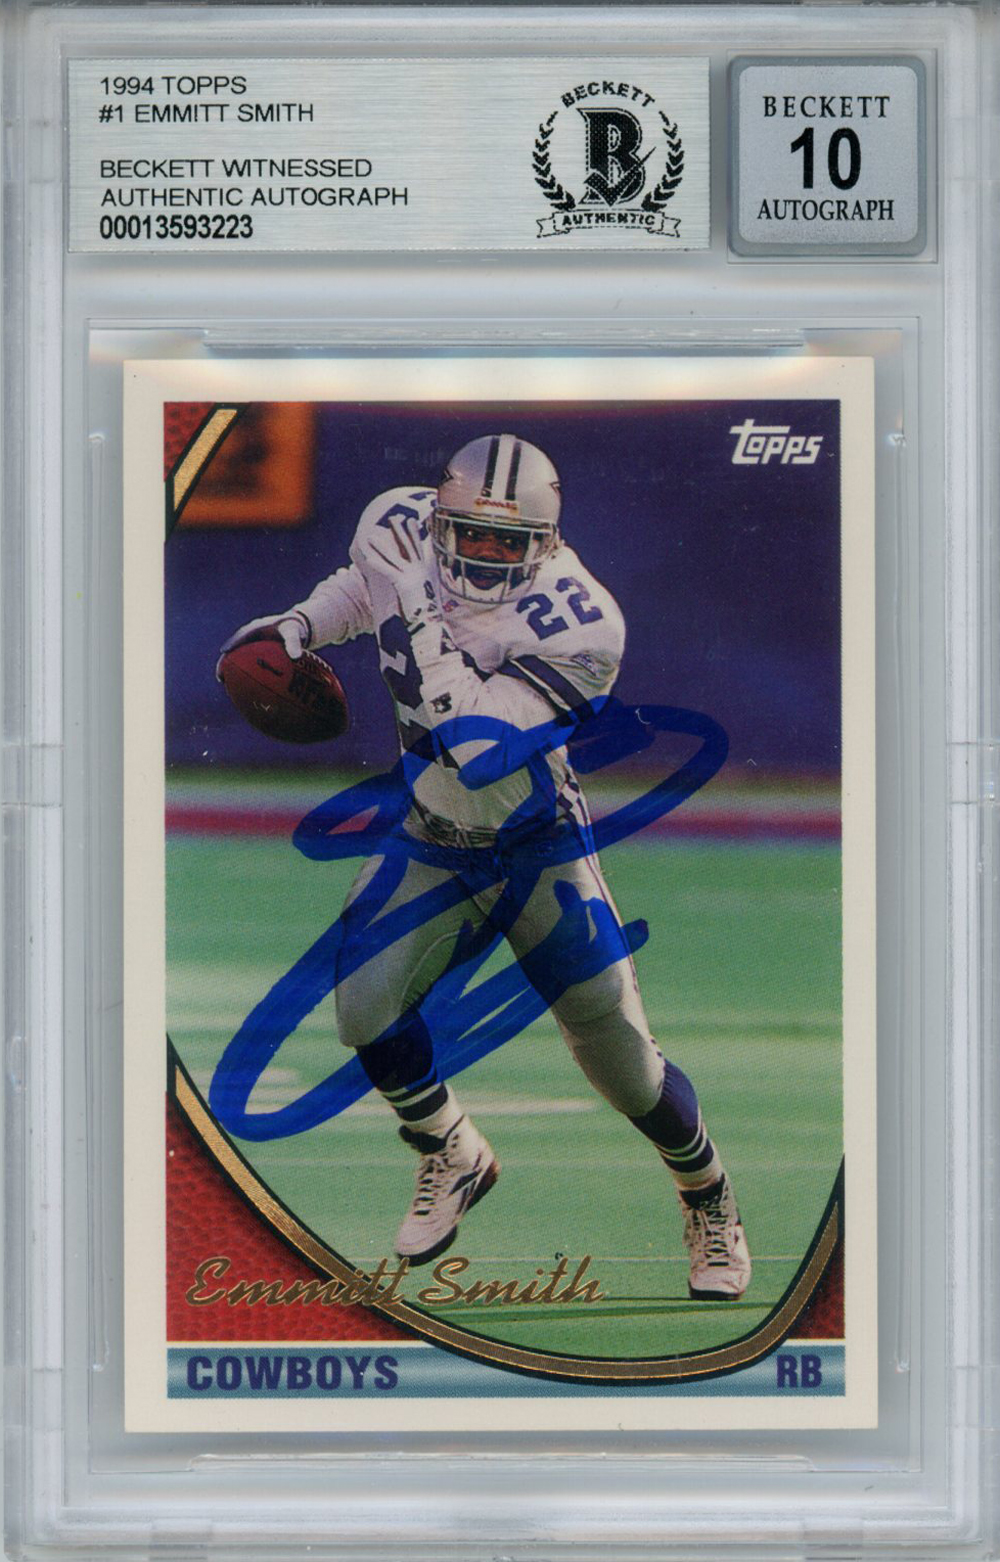 Emmitt Smith Autographed 1994 Topps #1 Trading Card Beckett 10 Slab